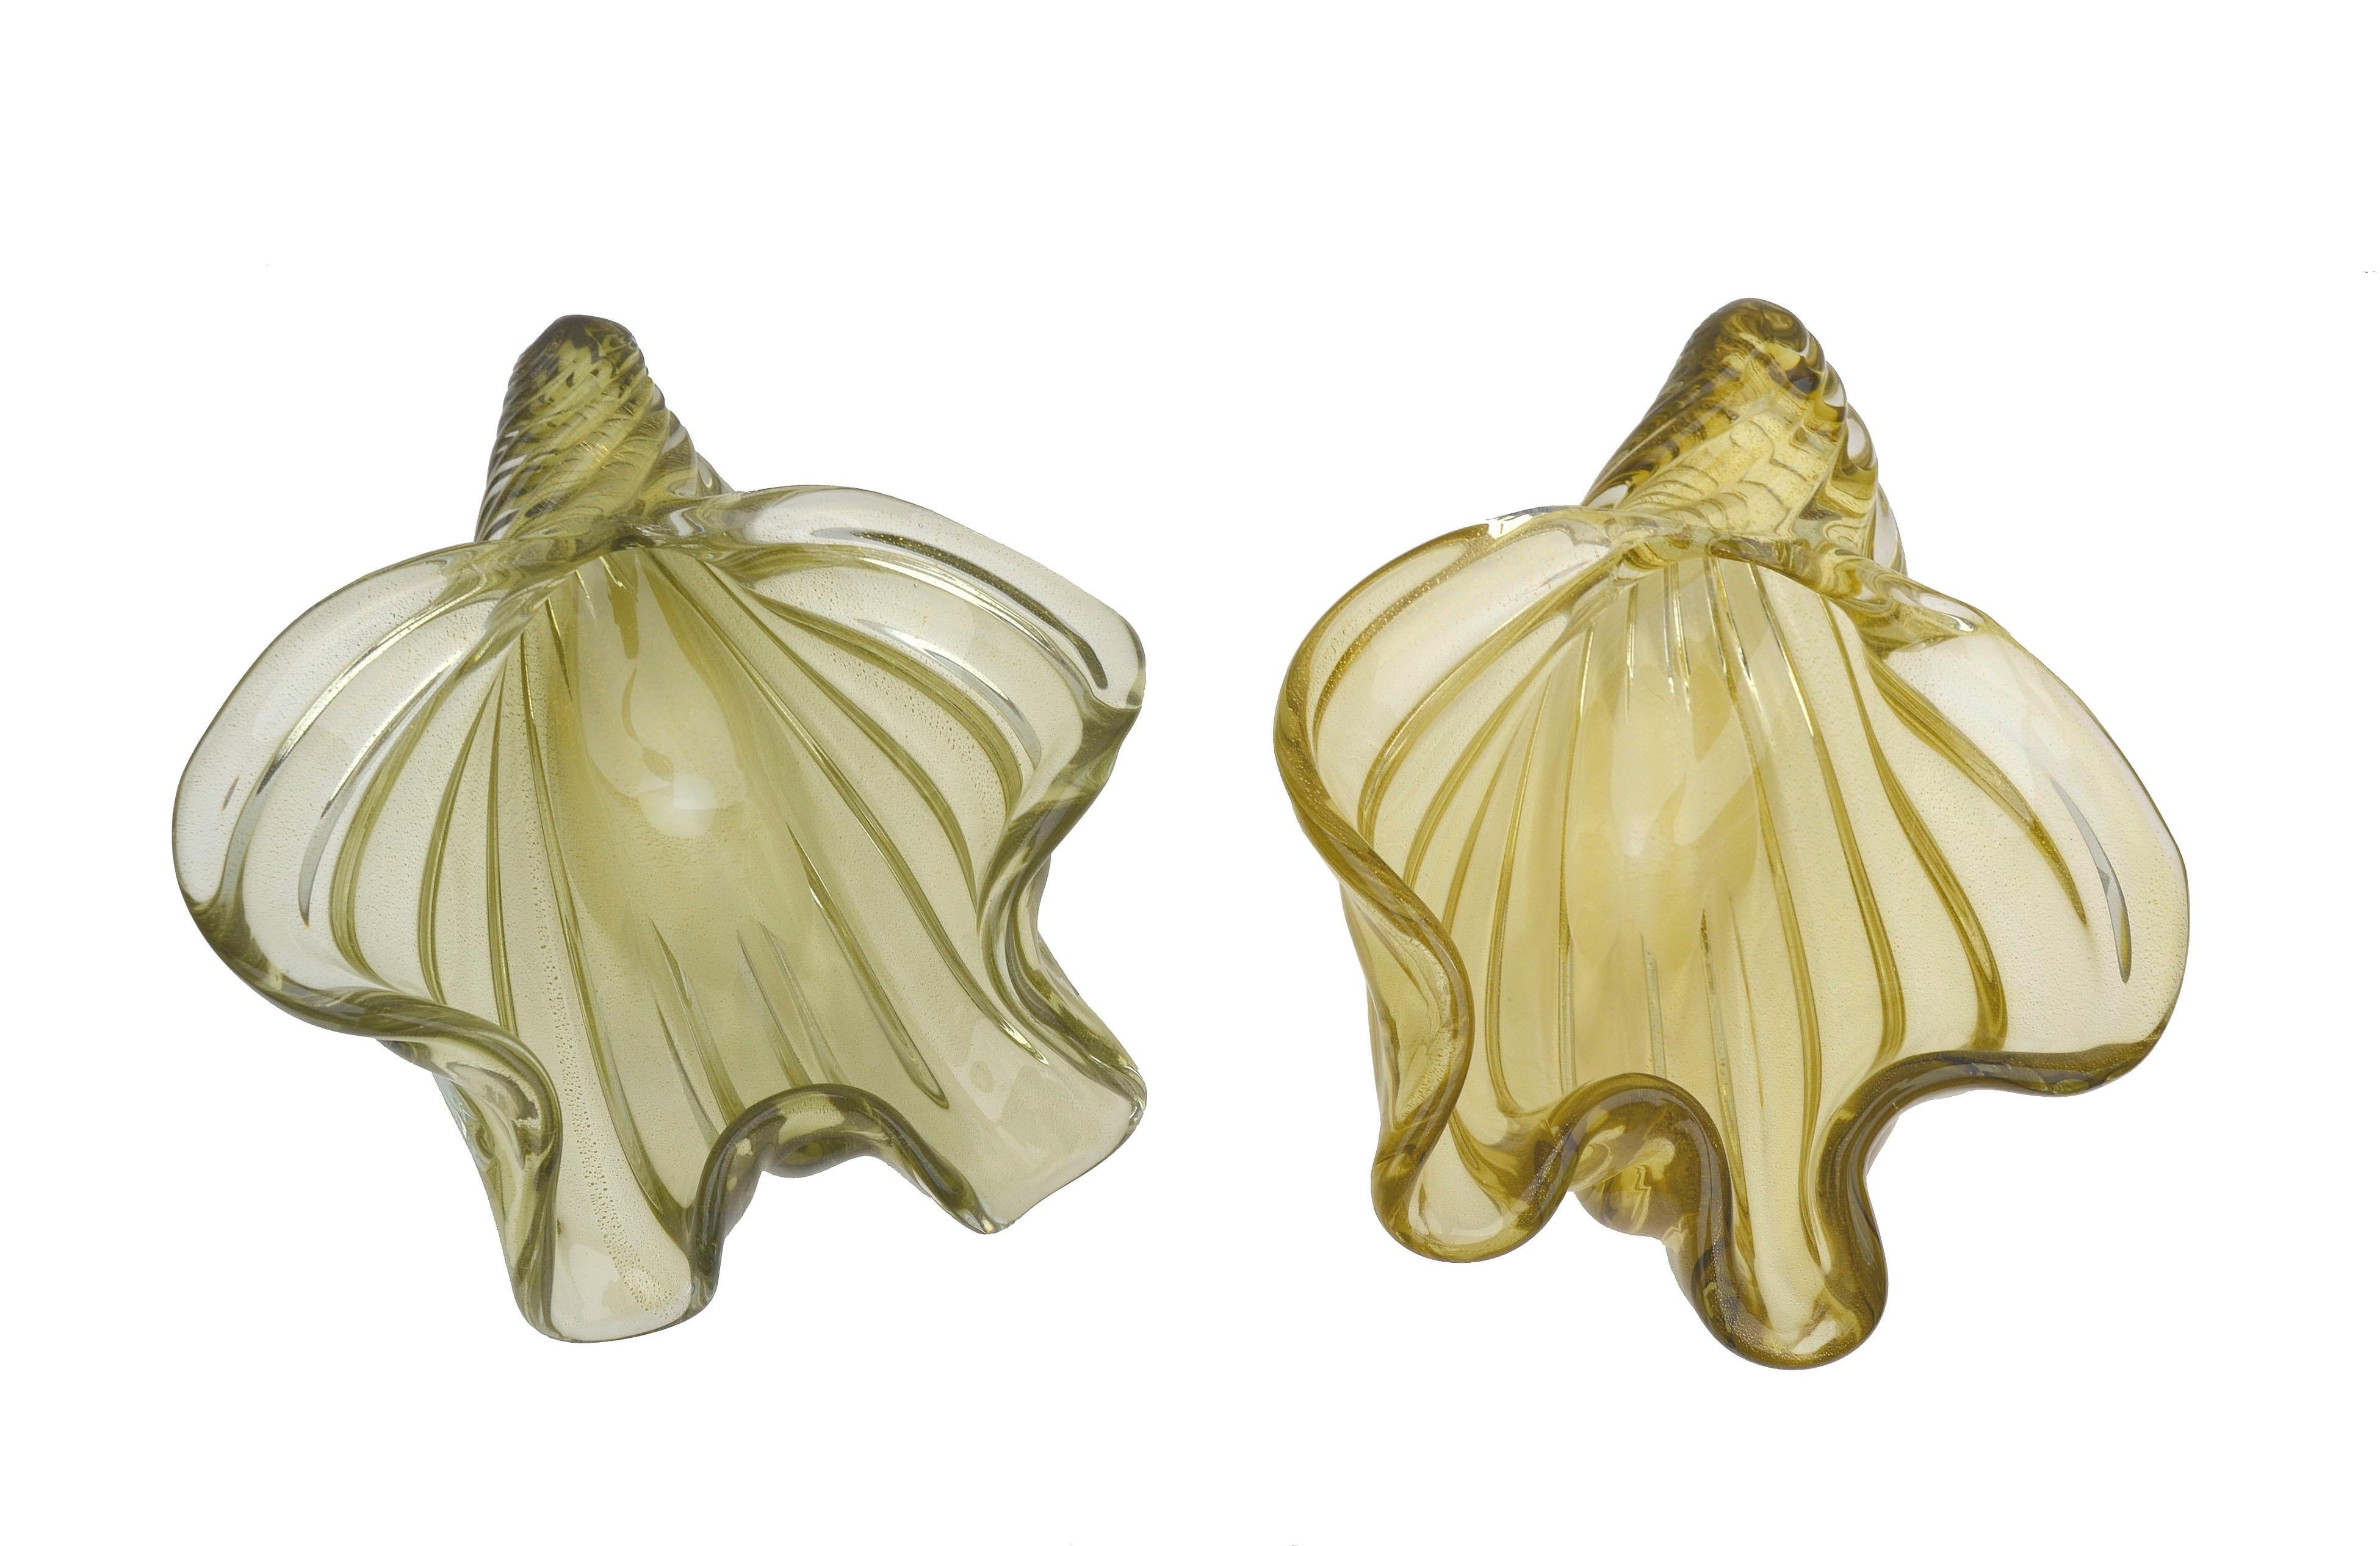 Two beautiful ruffled and spiraled Chartreuse colored glass pieces with small gold colored flecks trapped inside, evidence of the avventurina (Aventurine) technique, by Alfredo Barbini (Italian, 1912-2007). Pale olive bowl dimensions, 7